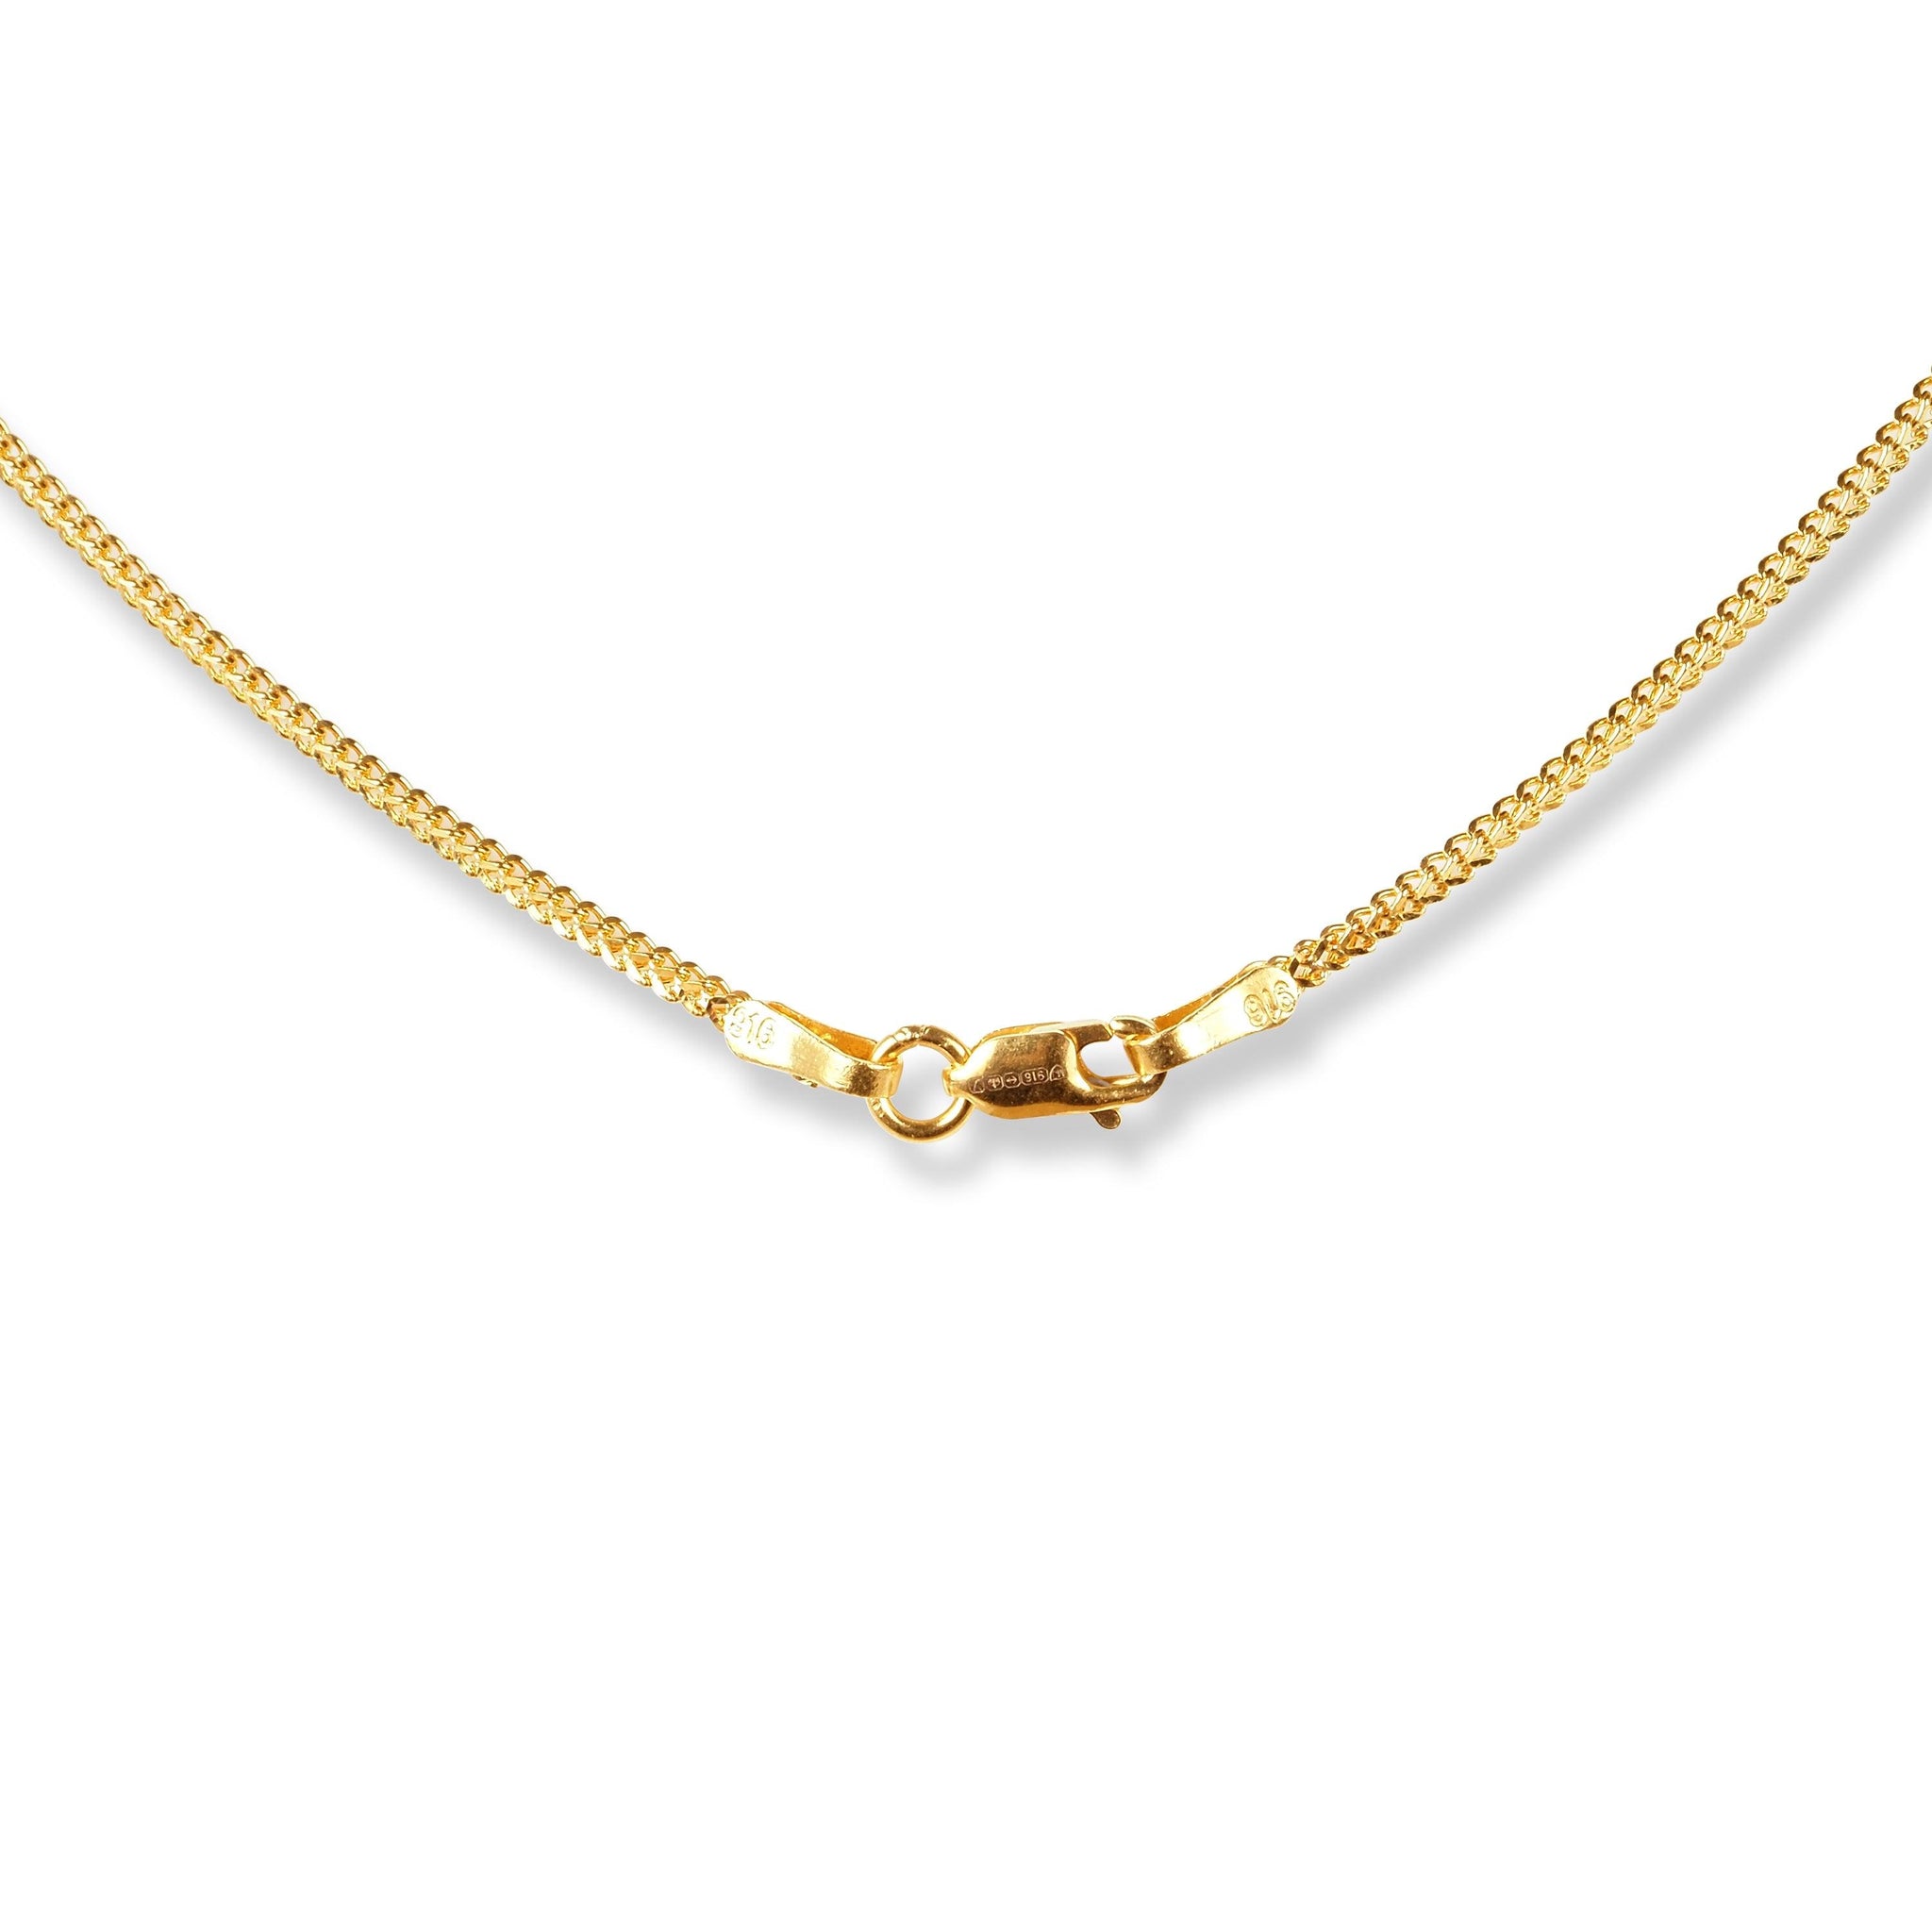 22ct Gold Box Chain With Sandblasted Beads and Lobster Clasp C-7147